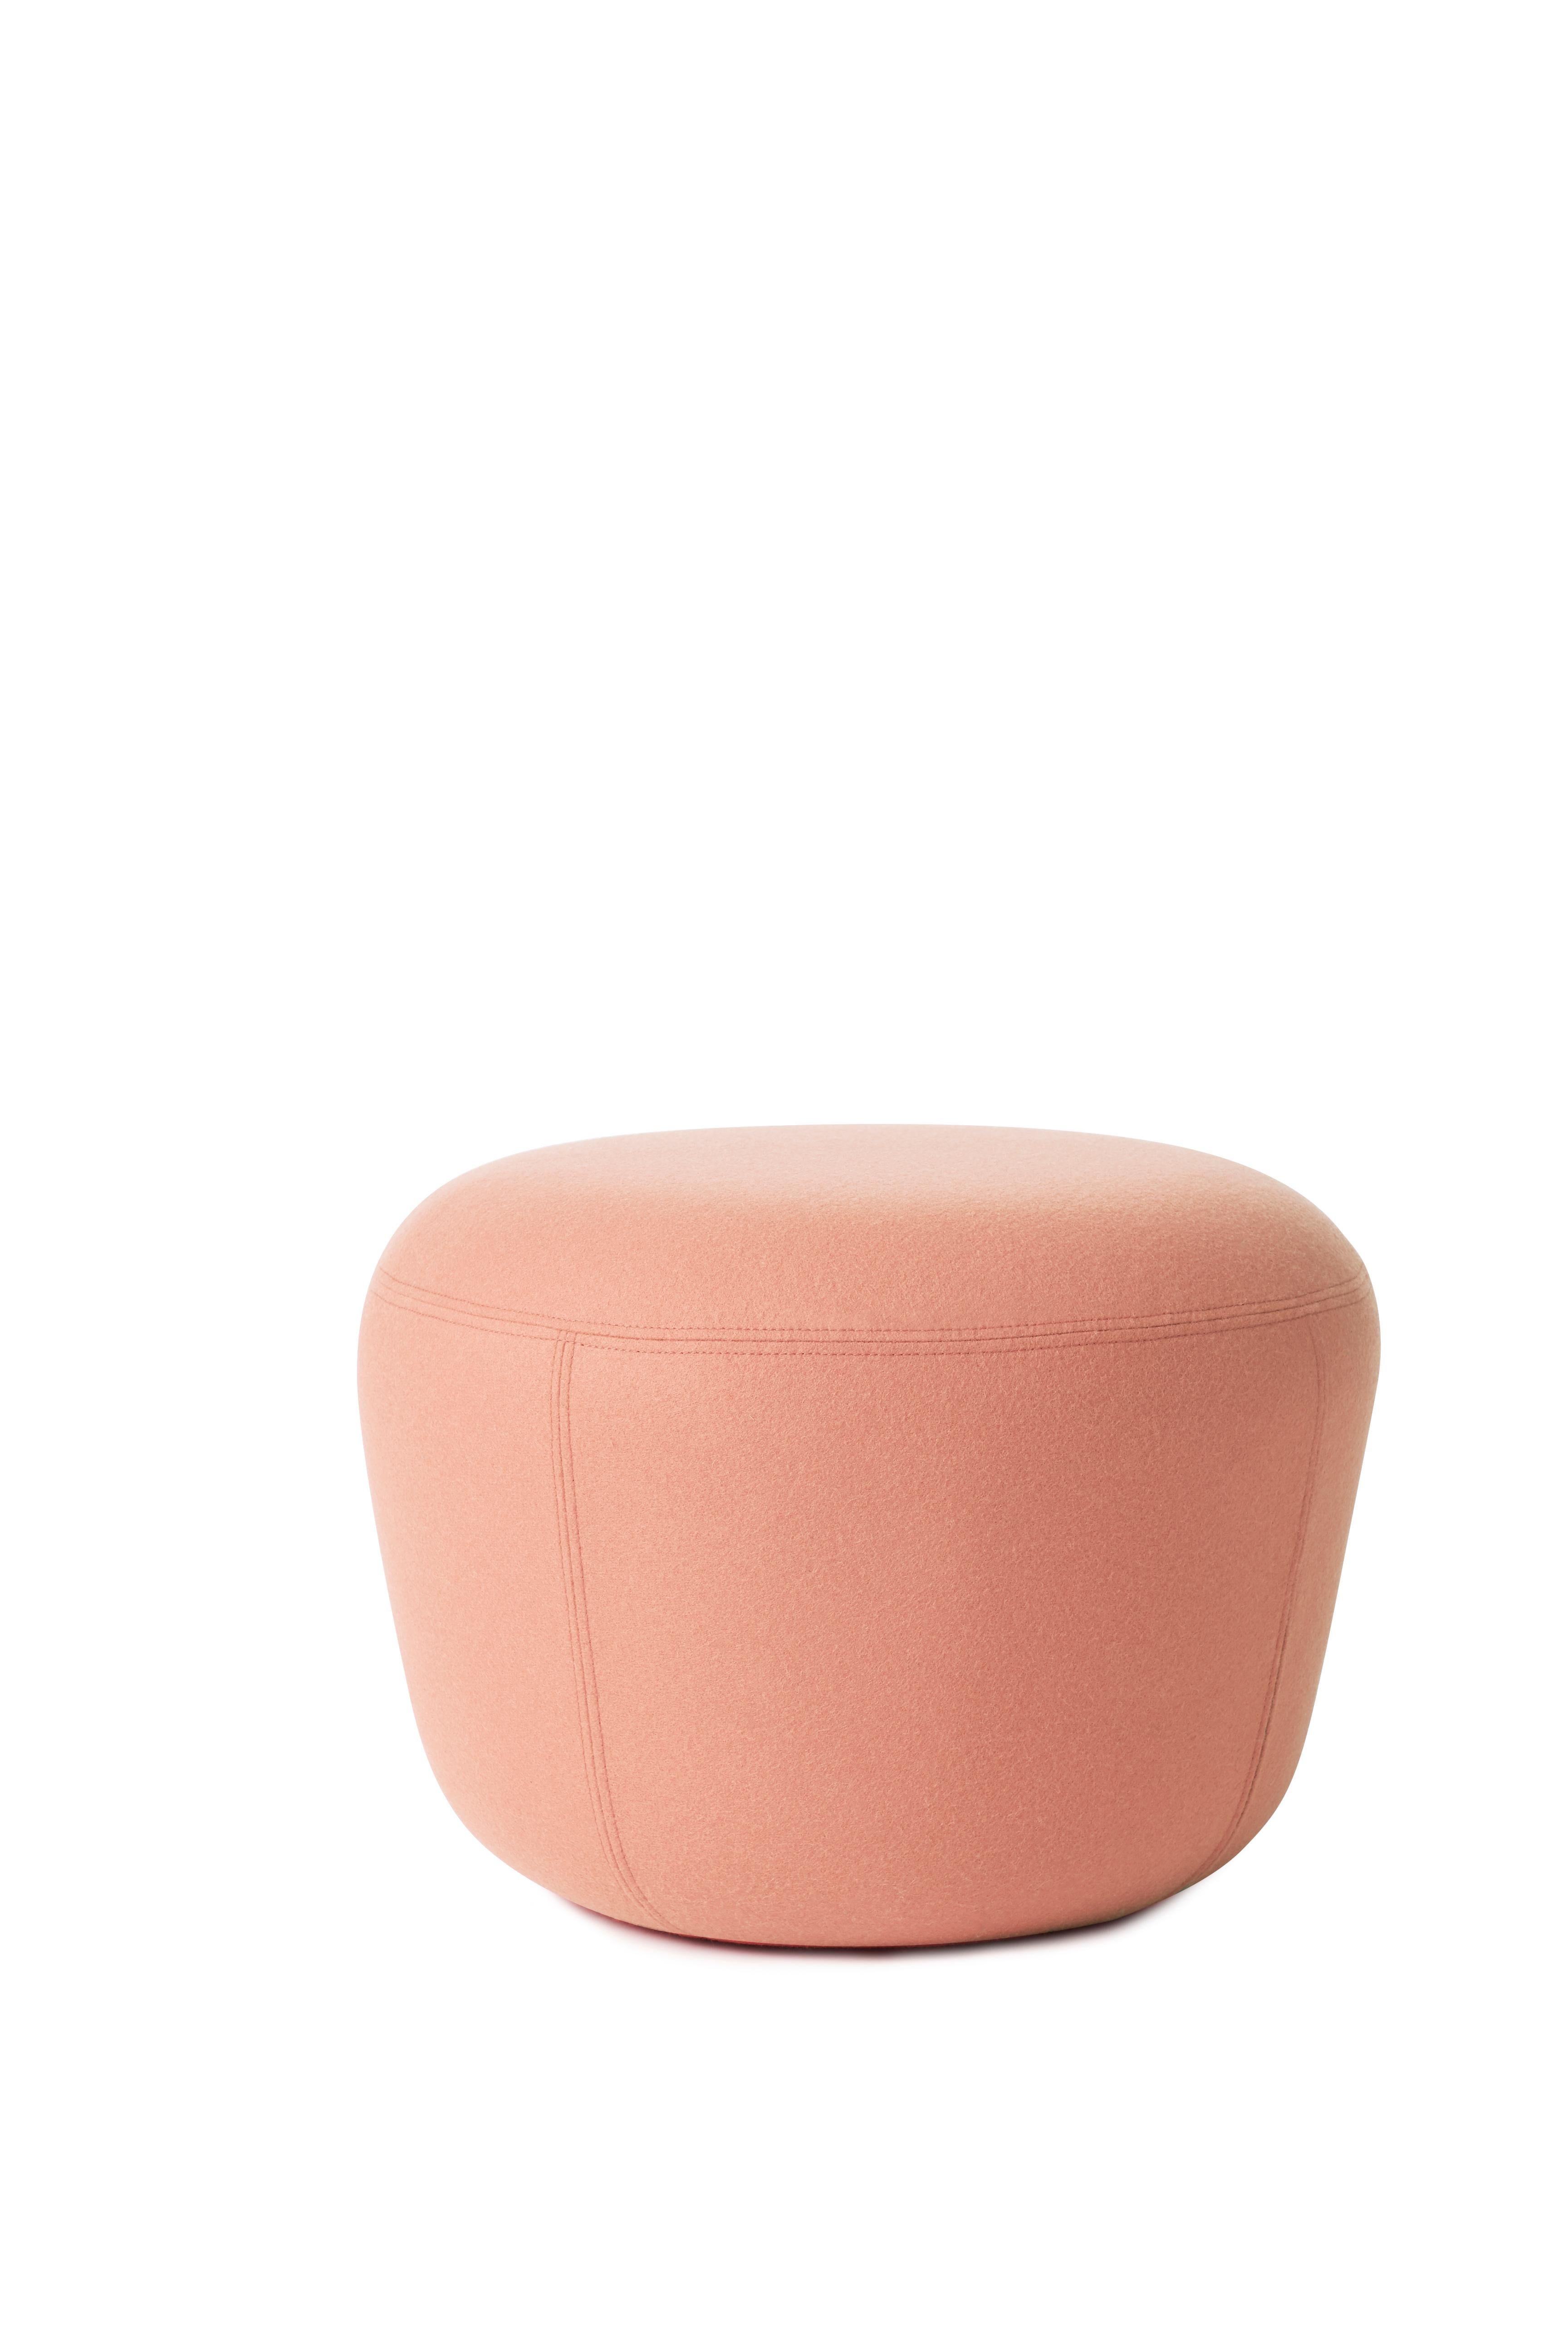 For Sale: Pink (Hero 511) Haven Pouf, by Charlotte Høncke from Warm Nordic